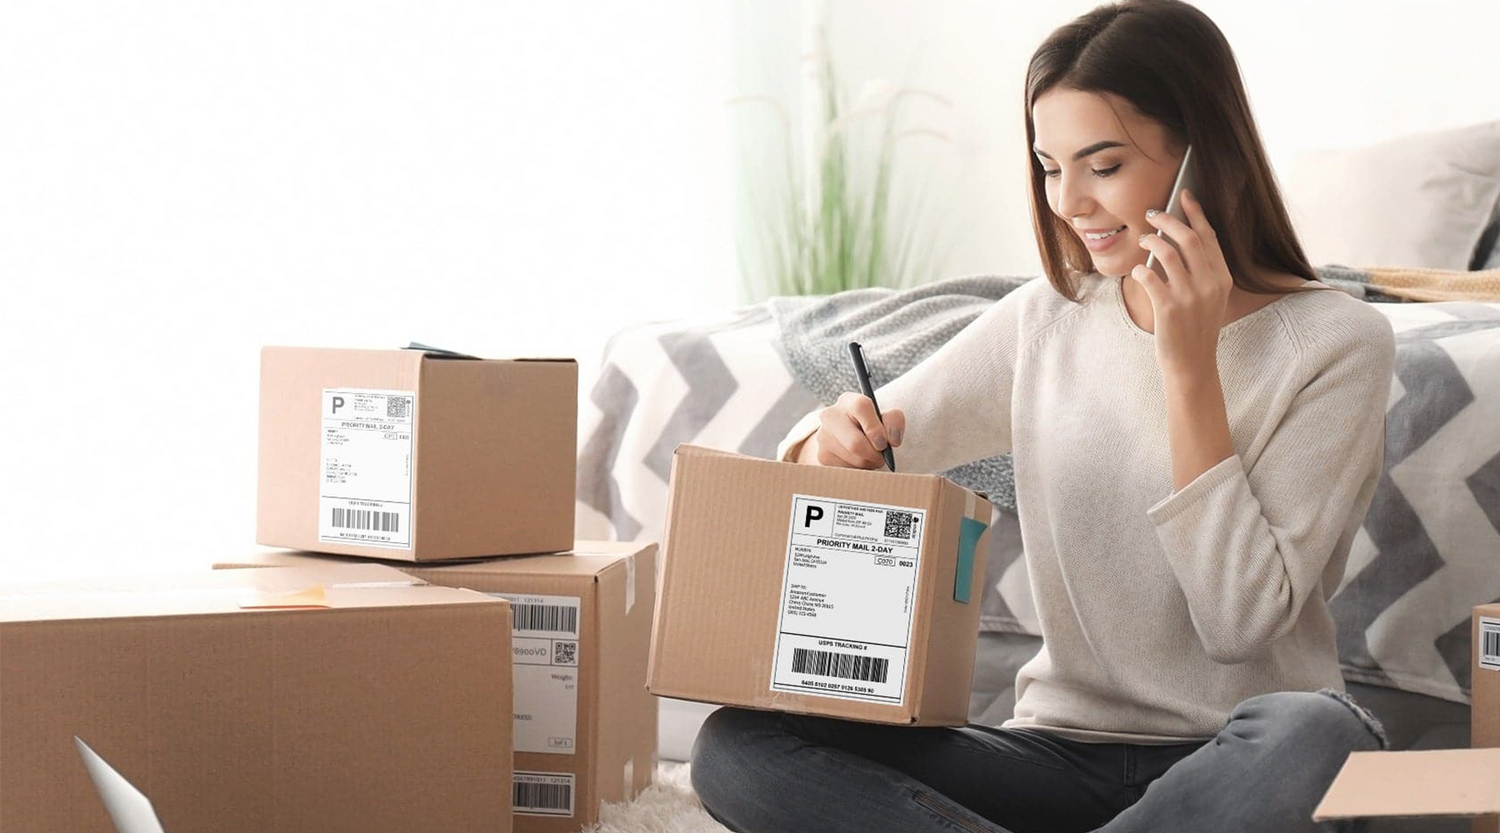 Cheapest Ways to Print Shipping Labels as a Small Business